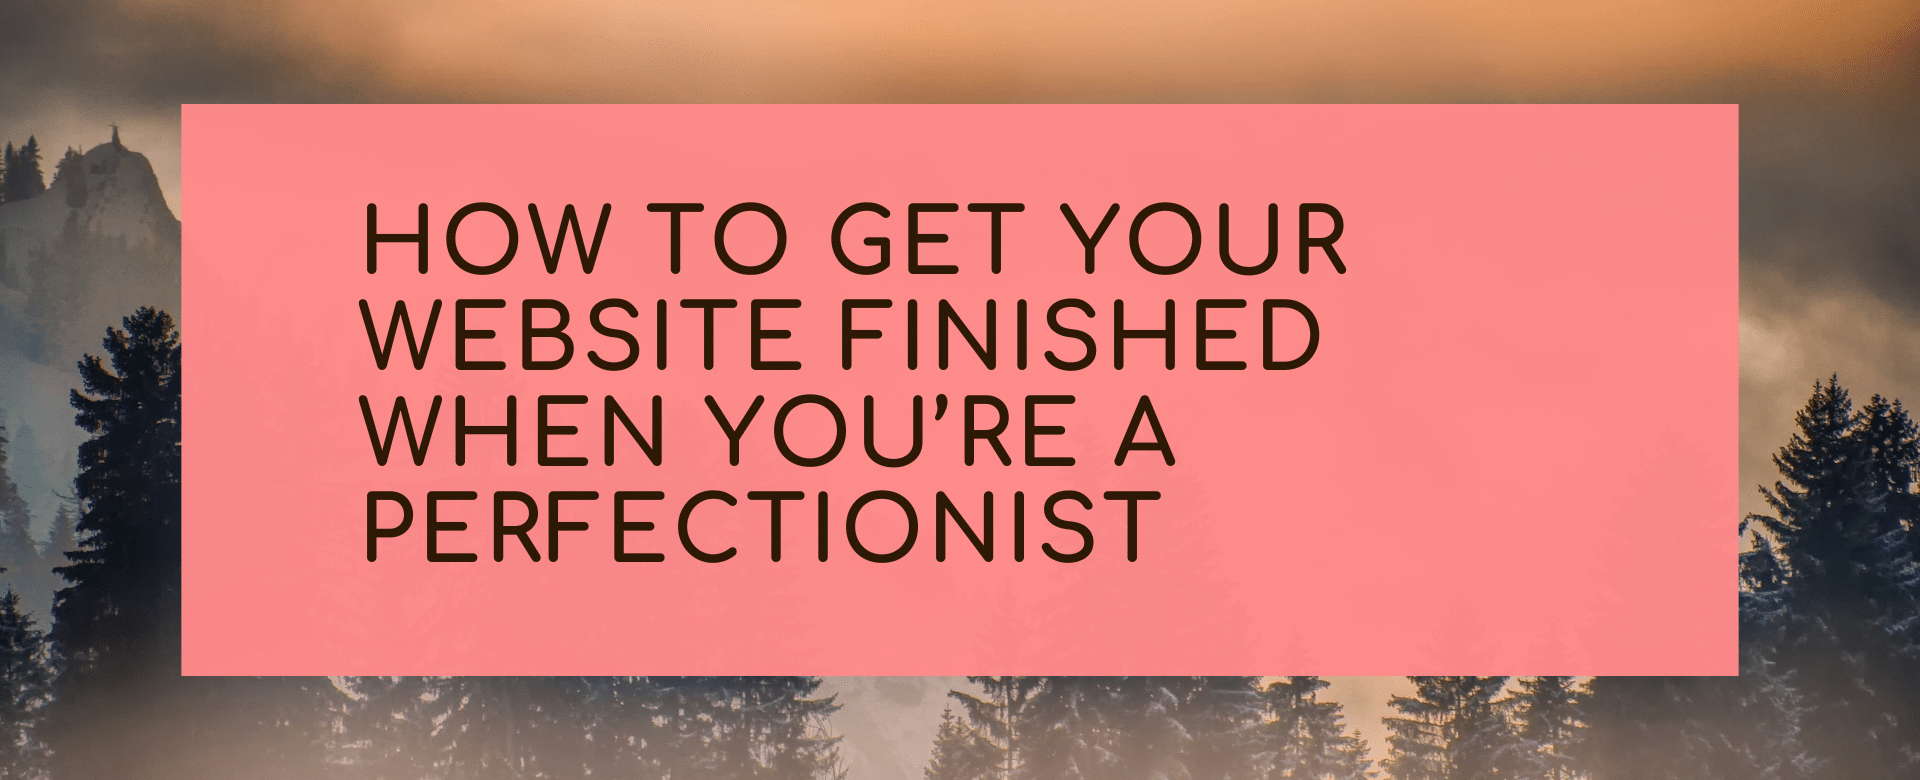 How to get your website finished when you’re a perfectionist